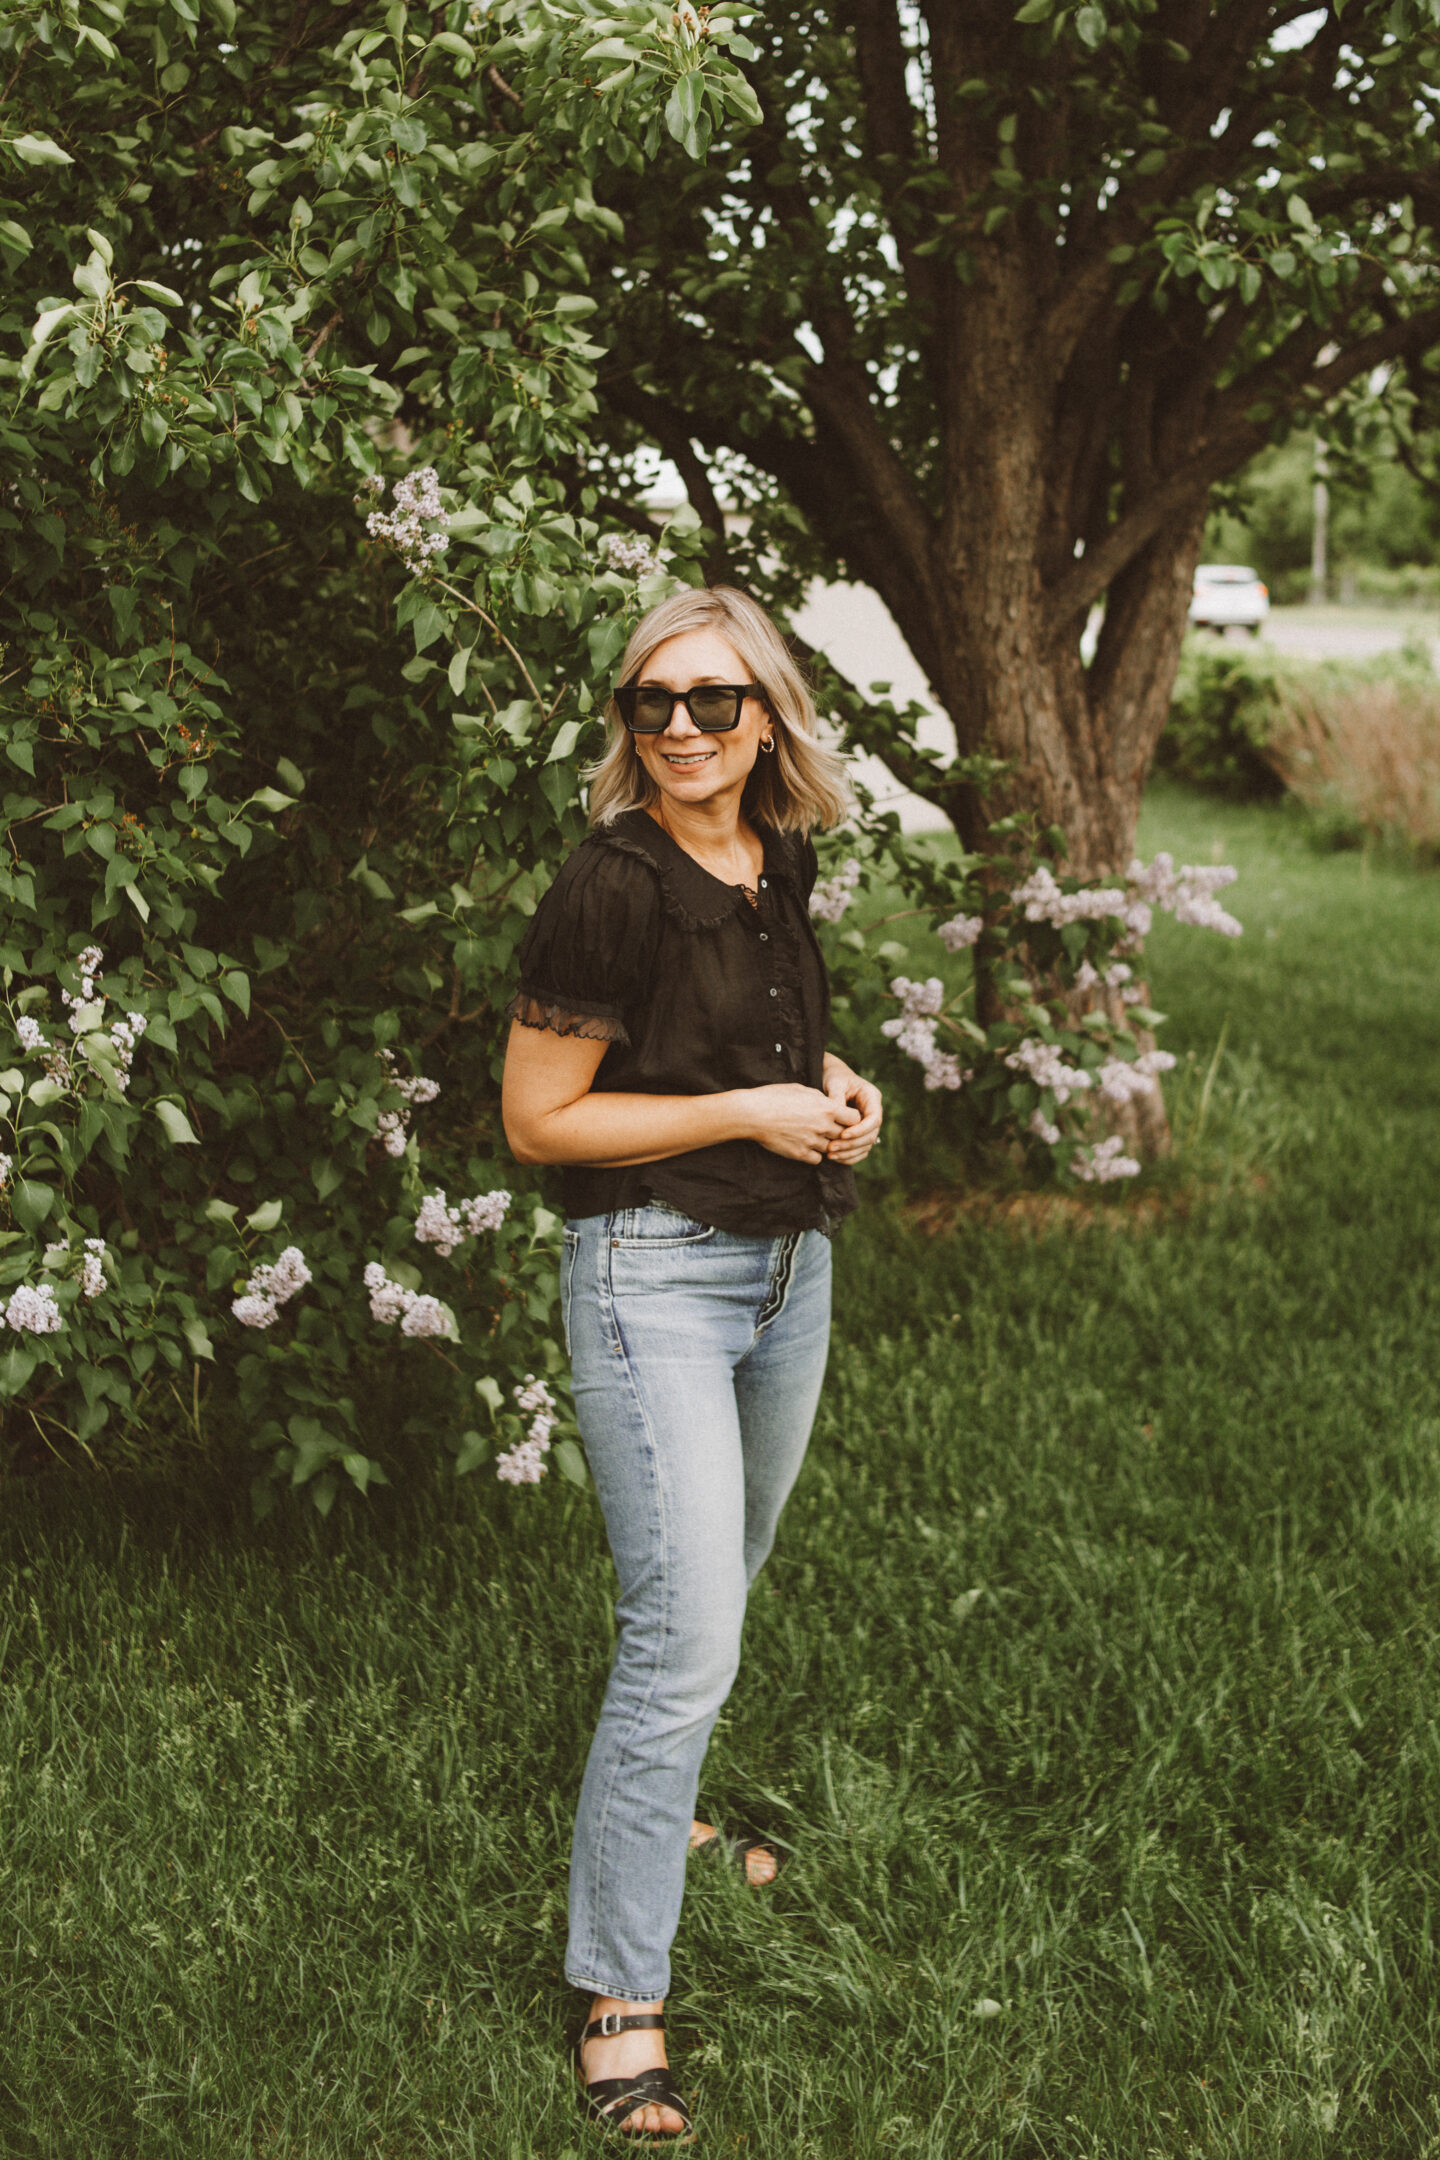 Karin Emily wears a black blouse from Doen, the CItizens of Humanity Charlotte Jeans, and Black Saltwater Sandals